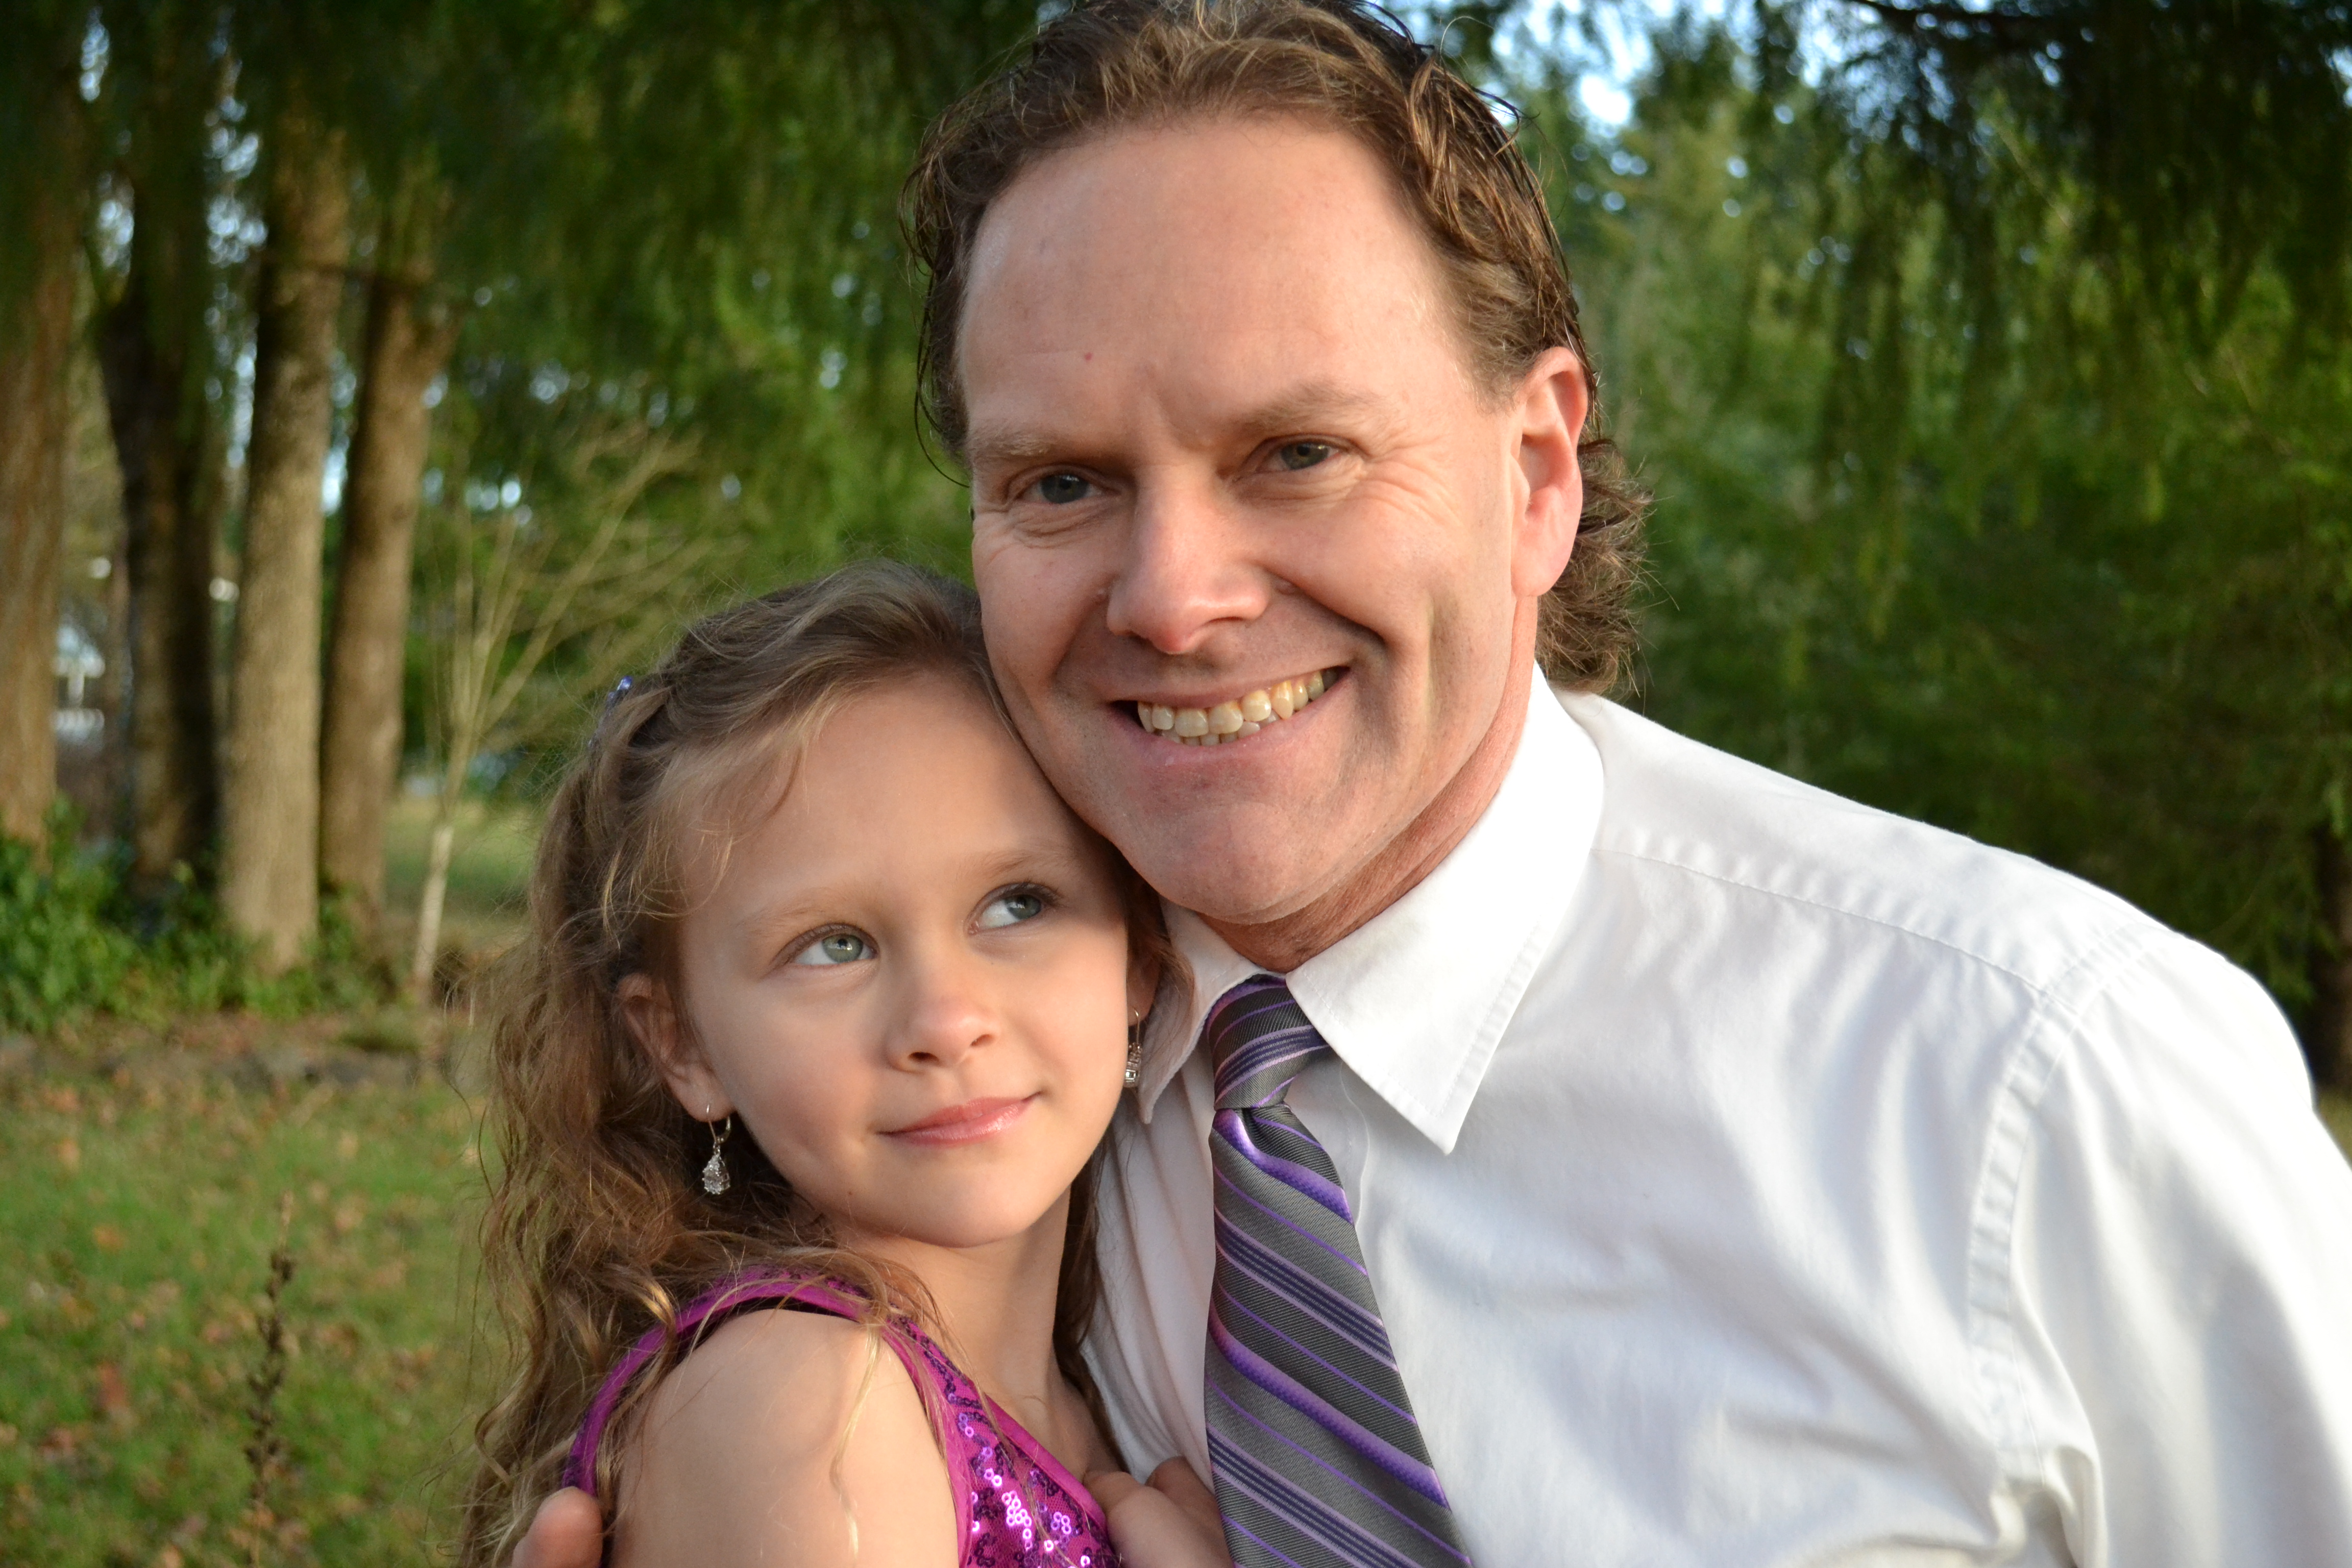 "Father / Daughter Dance - February 2013"